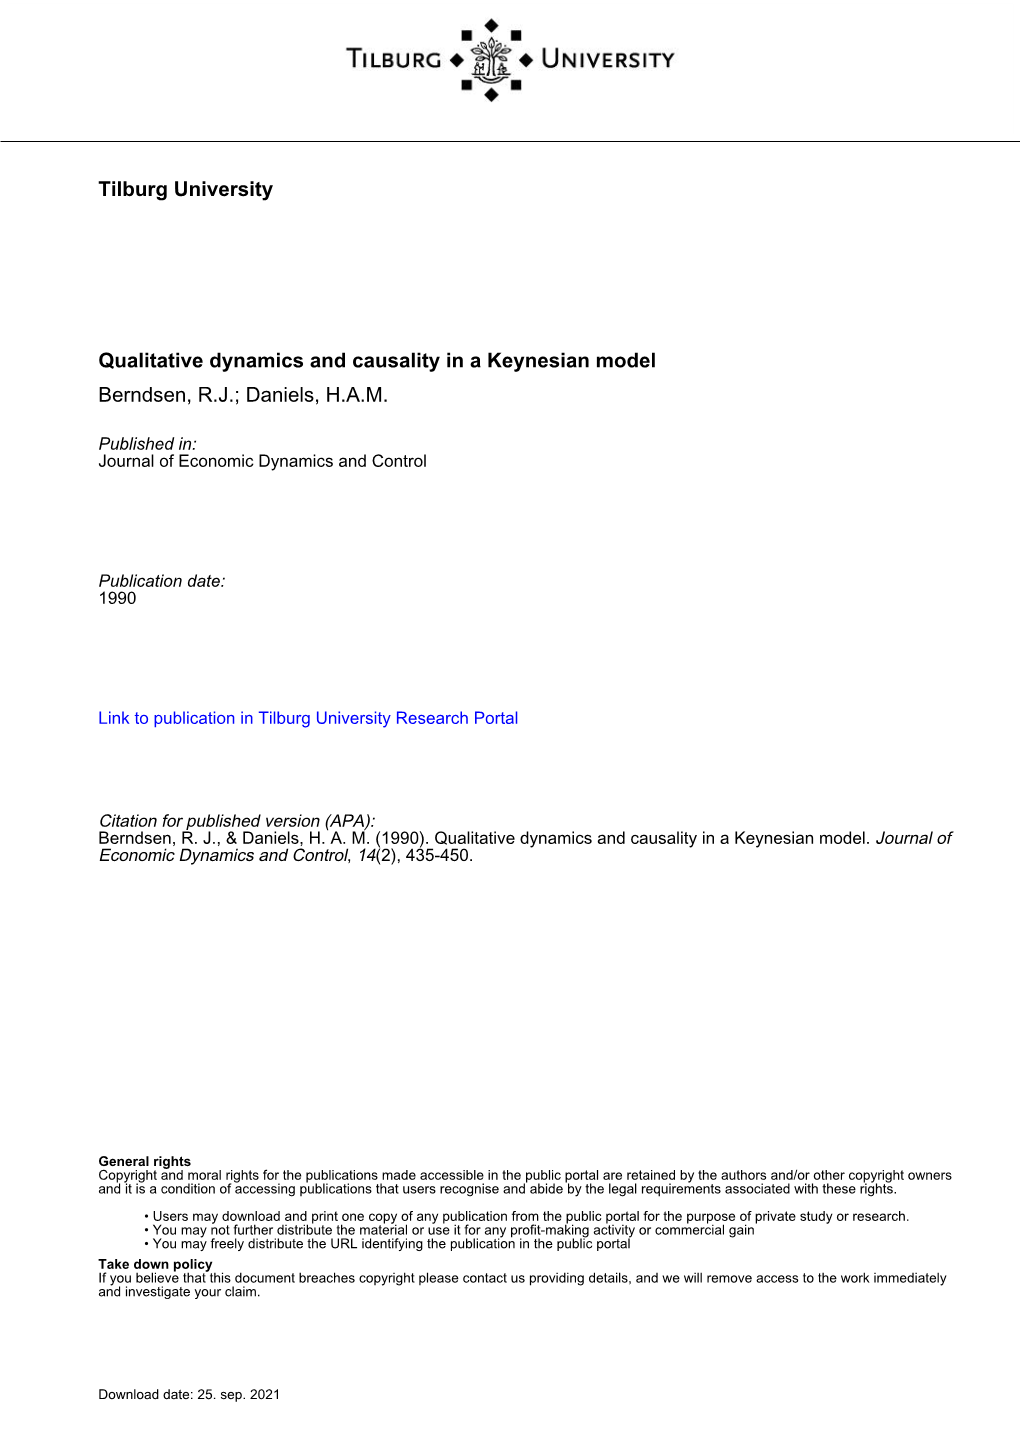 Tilburg University Qualitative Dynamics and Causality in A